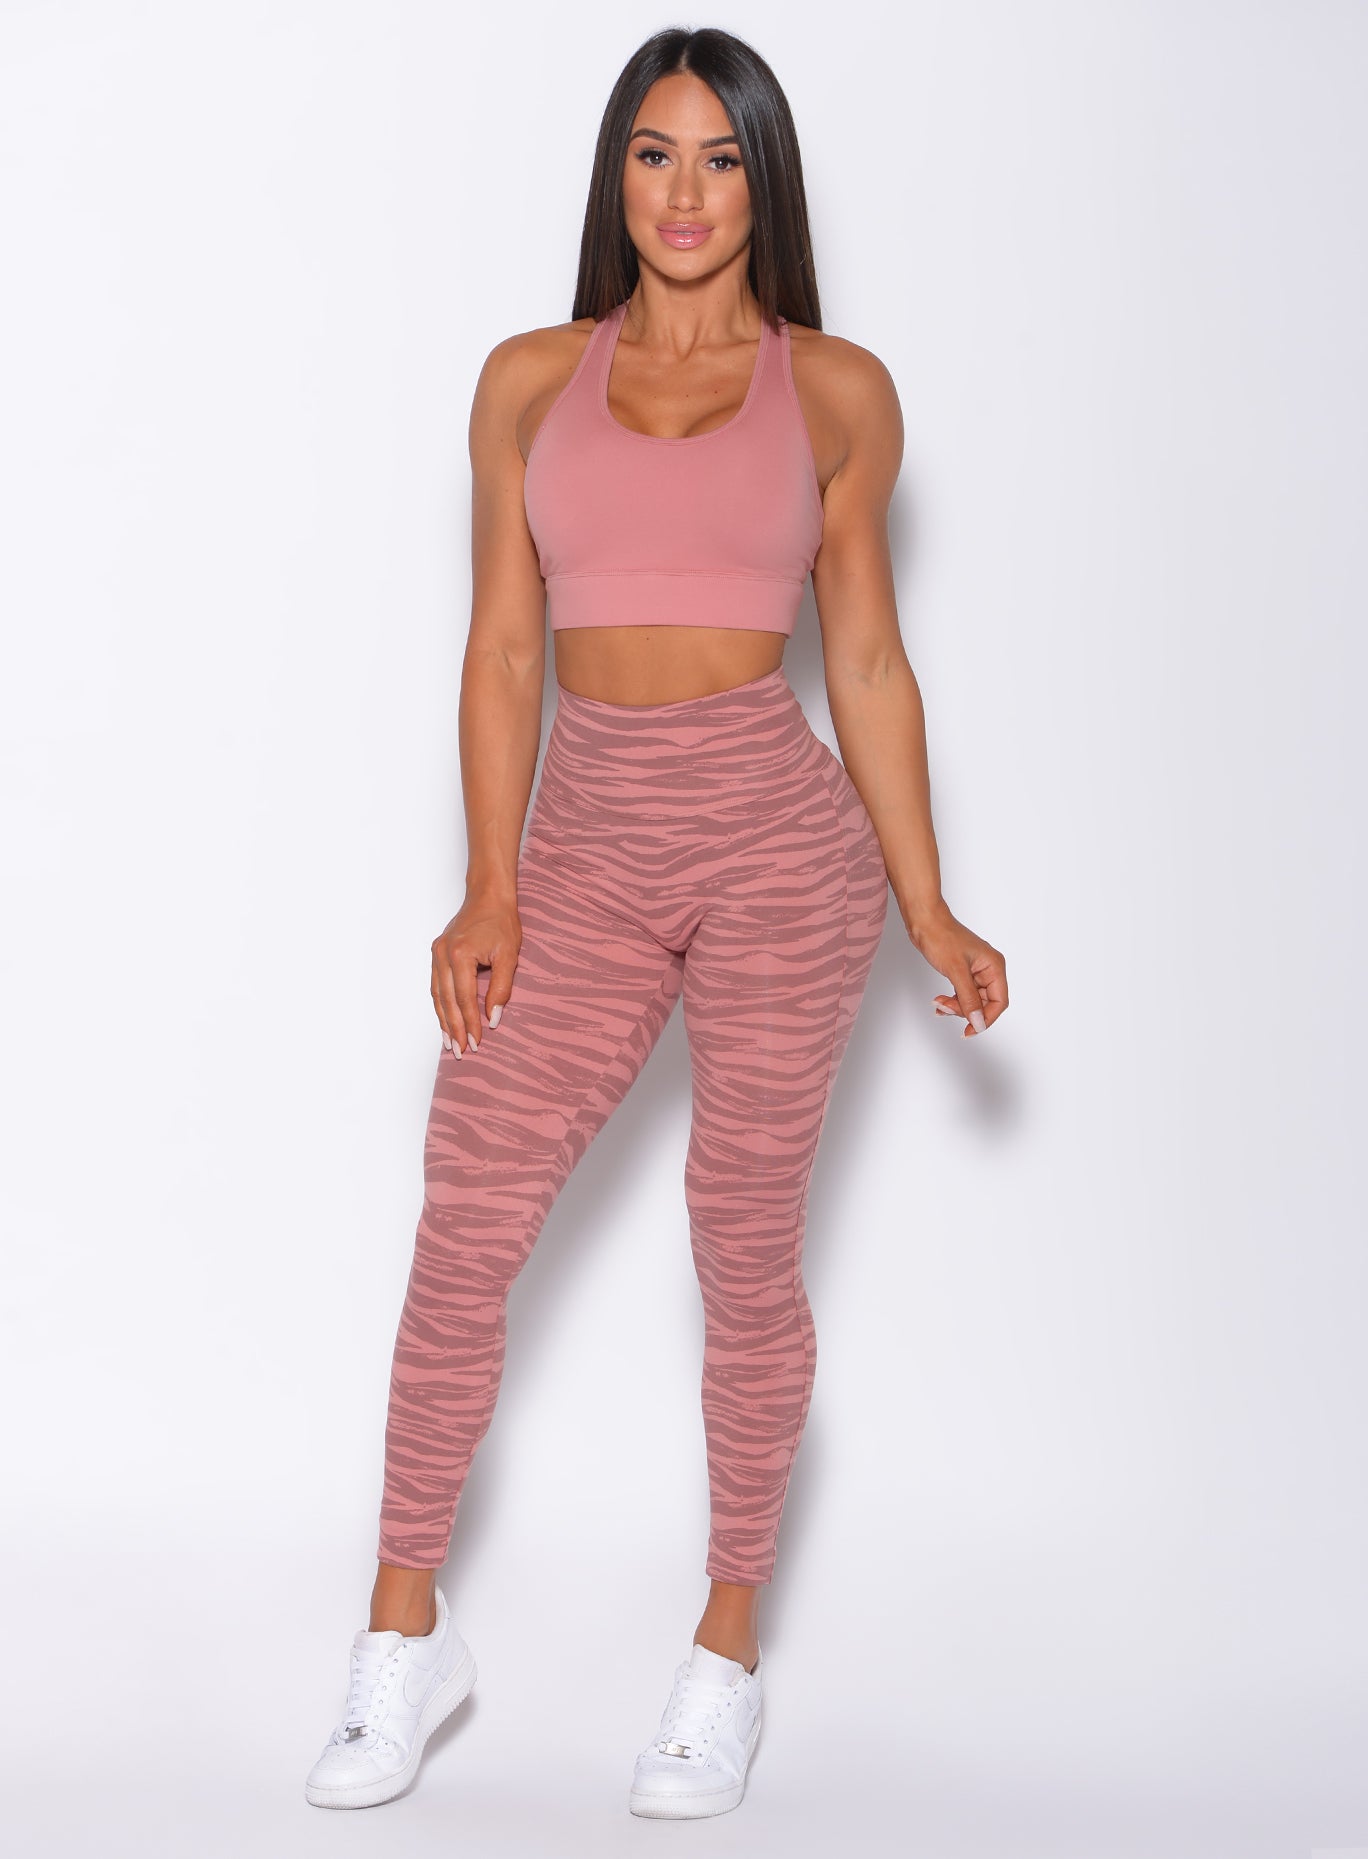 Model facing forward wearing our rival sports bra in solid blush color and a matching tiger print leggings